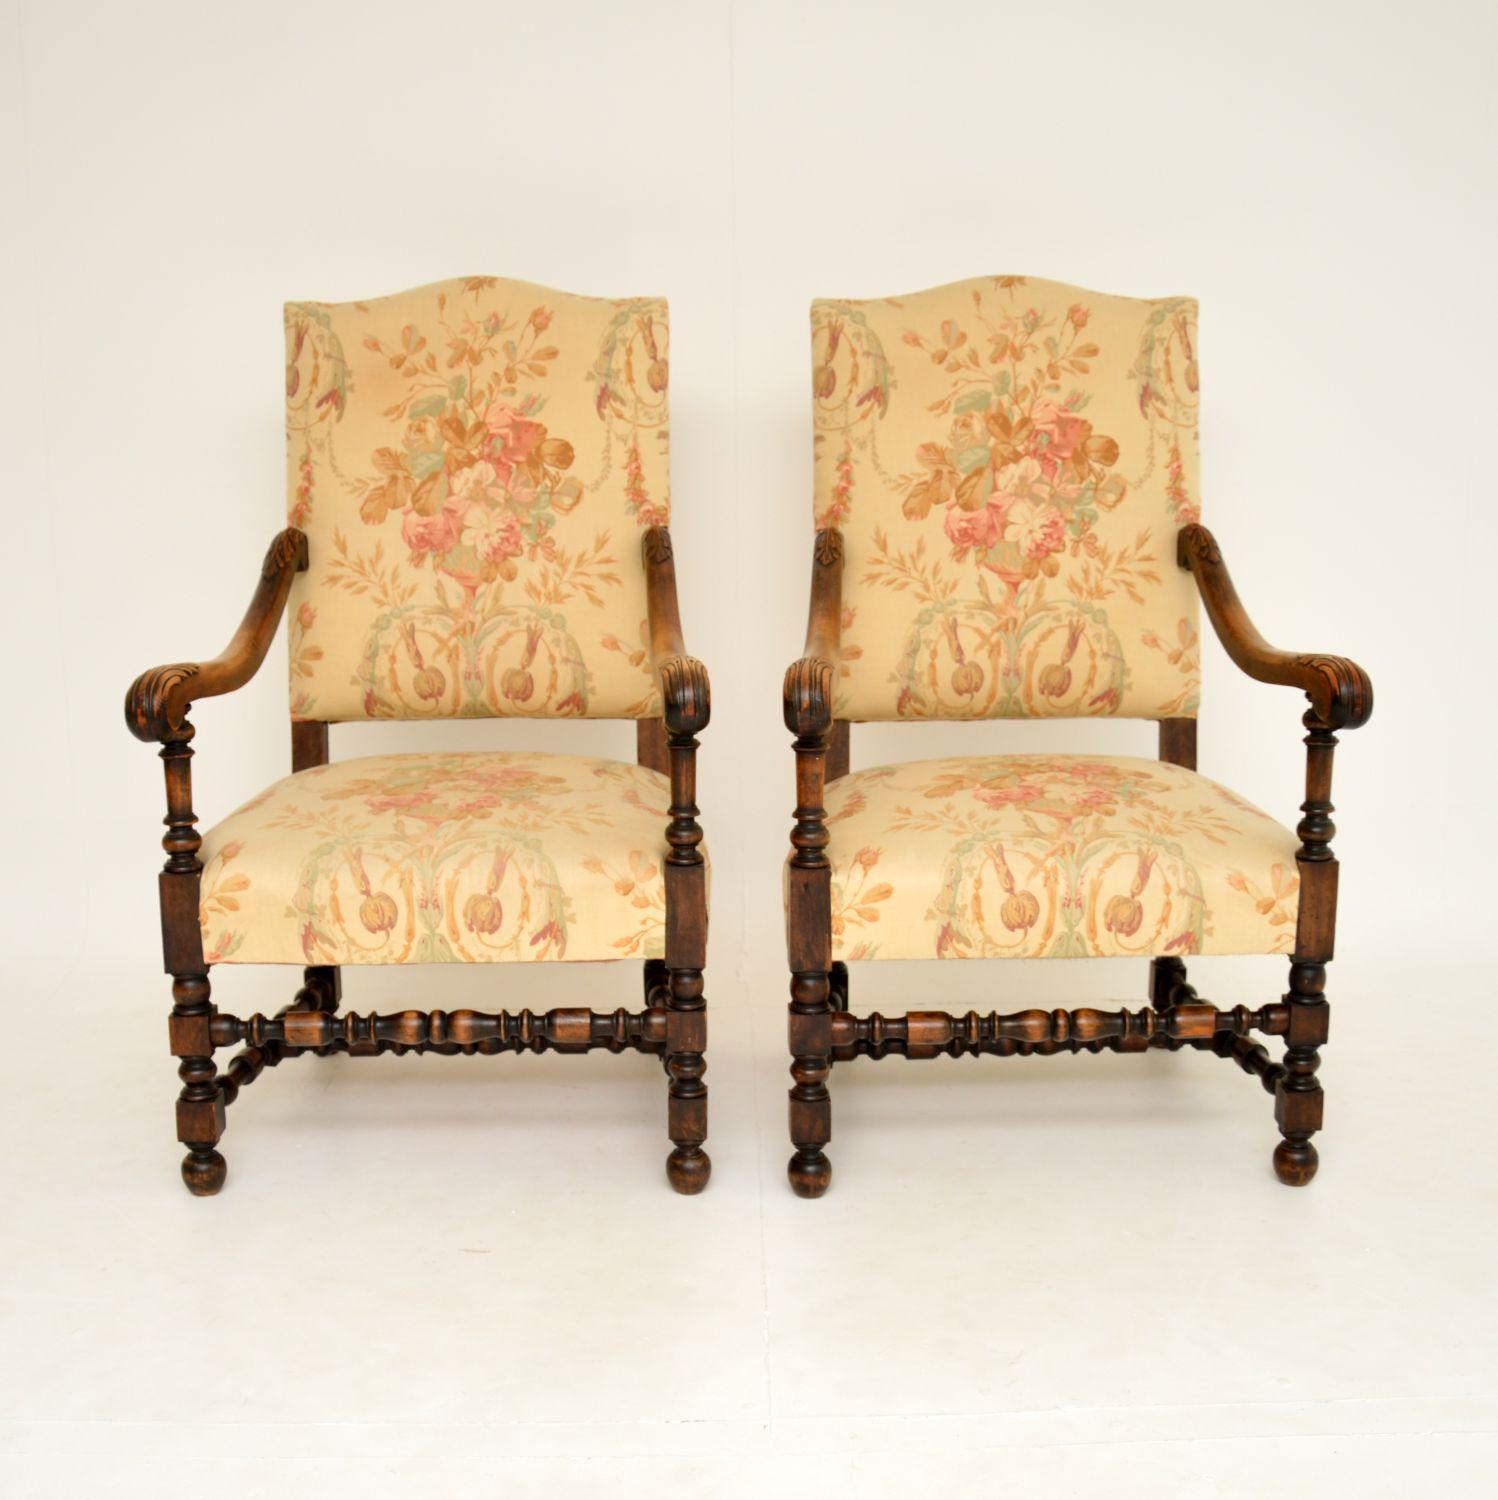 English Pair of Antique Carolean Style Carved Oak Armchairs